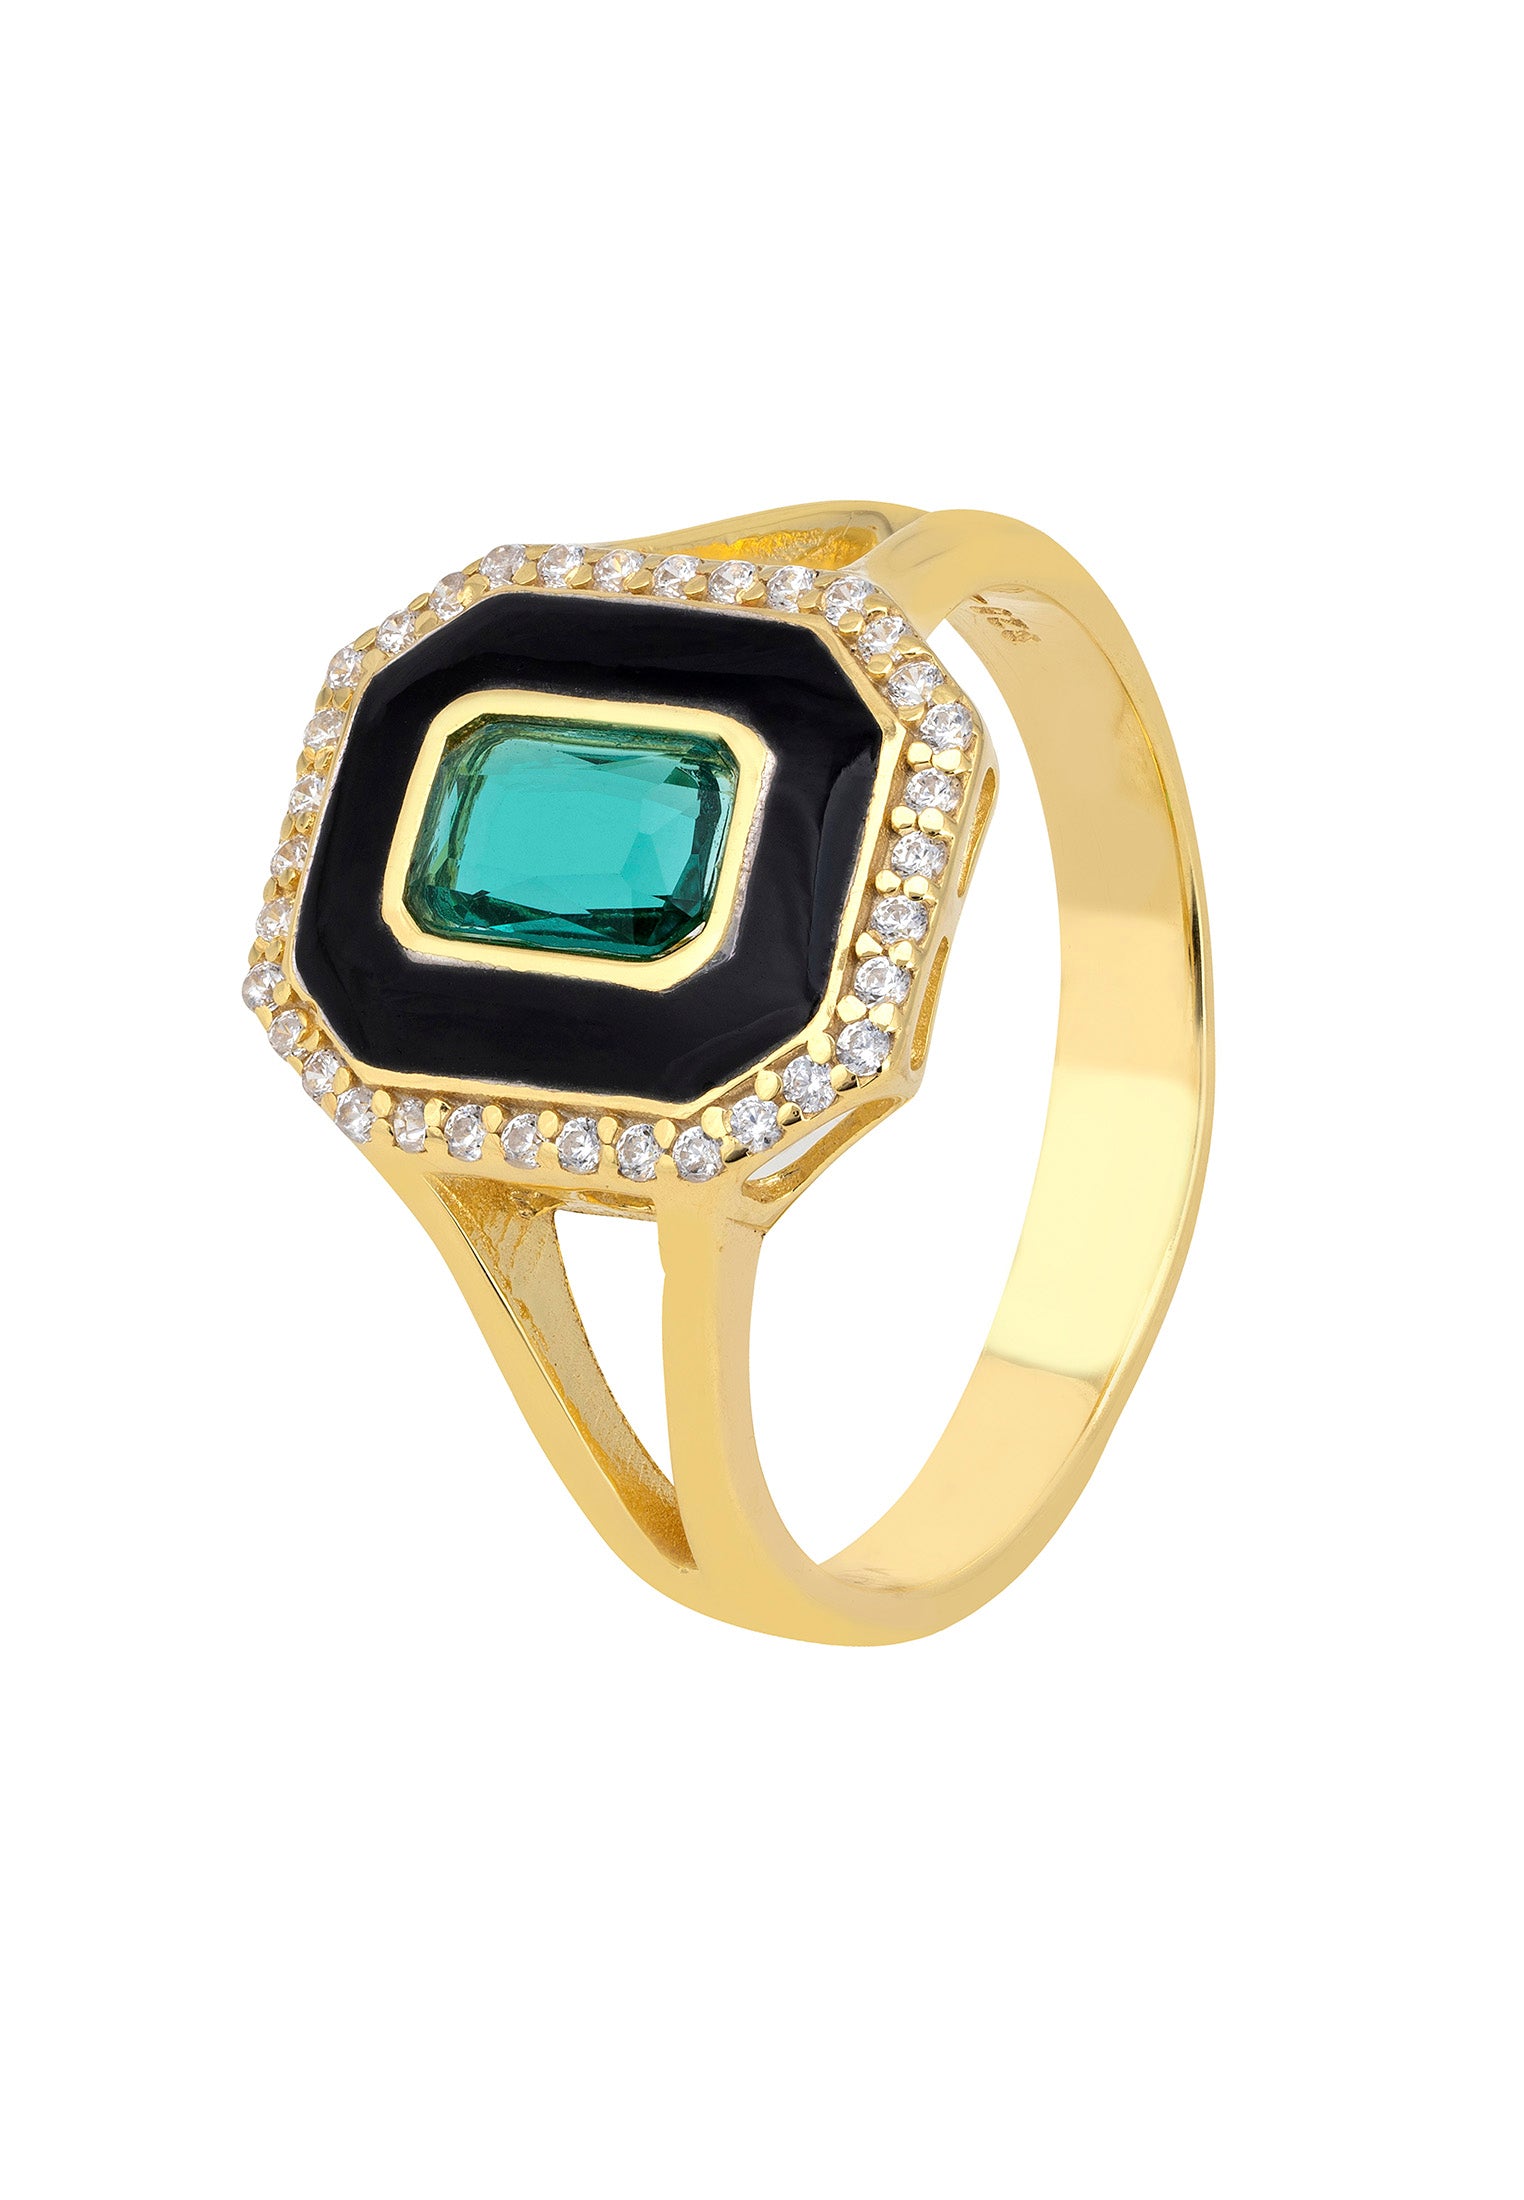 Art Deco Emerald And Enamel Cocktail Ring Gold